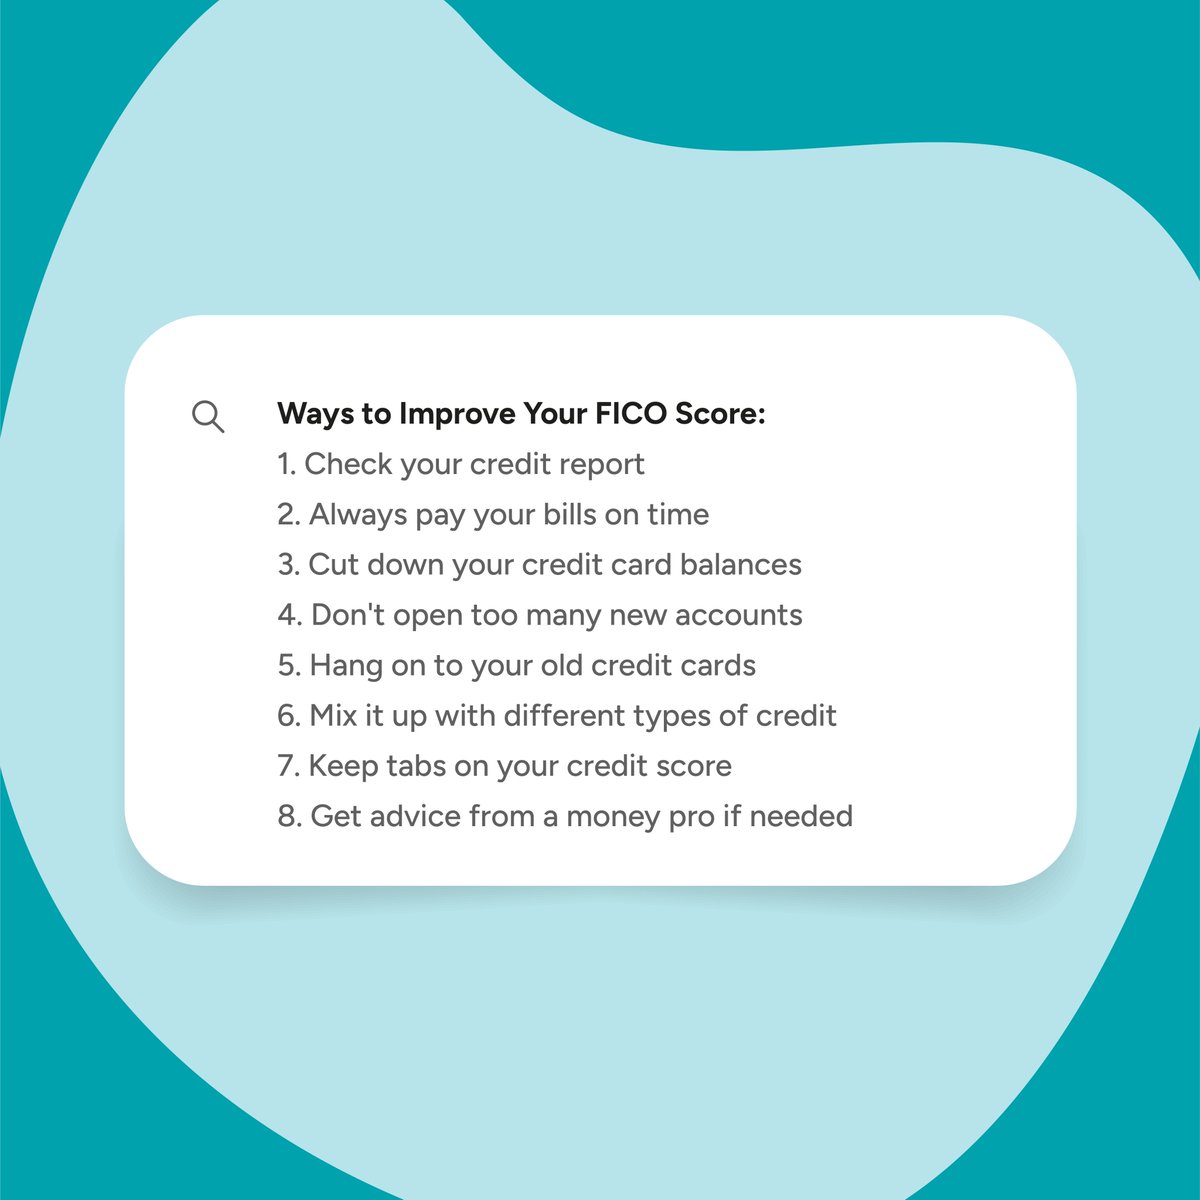 Demystifying FICO scores! 💳 Let's break down what they are, what factors influence them, and how students can boost theirs for financial success. 📈💰 #collegeave #financialliteracy #FICO #FICOScore #creditscore collegeave.blog/FICO_scores